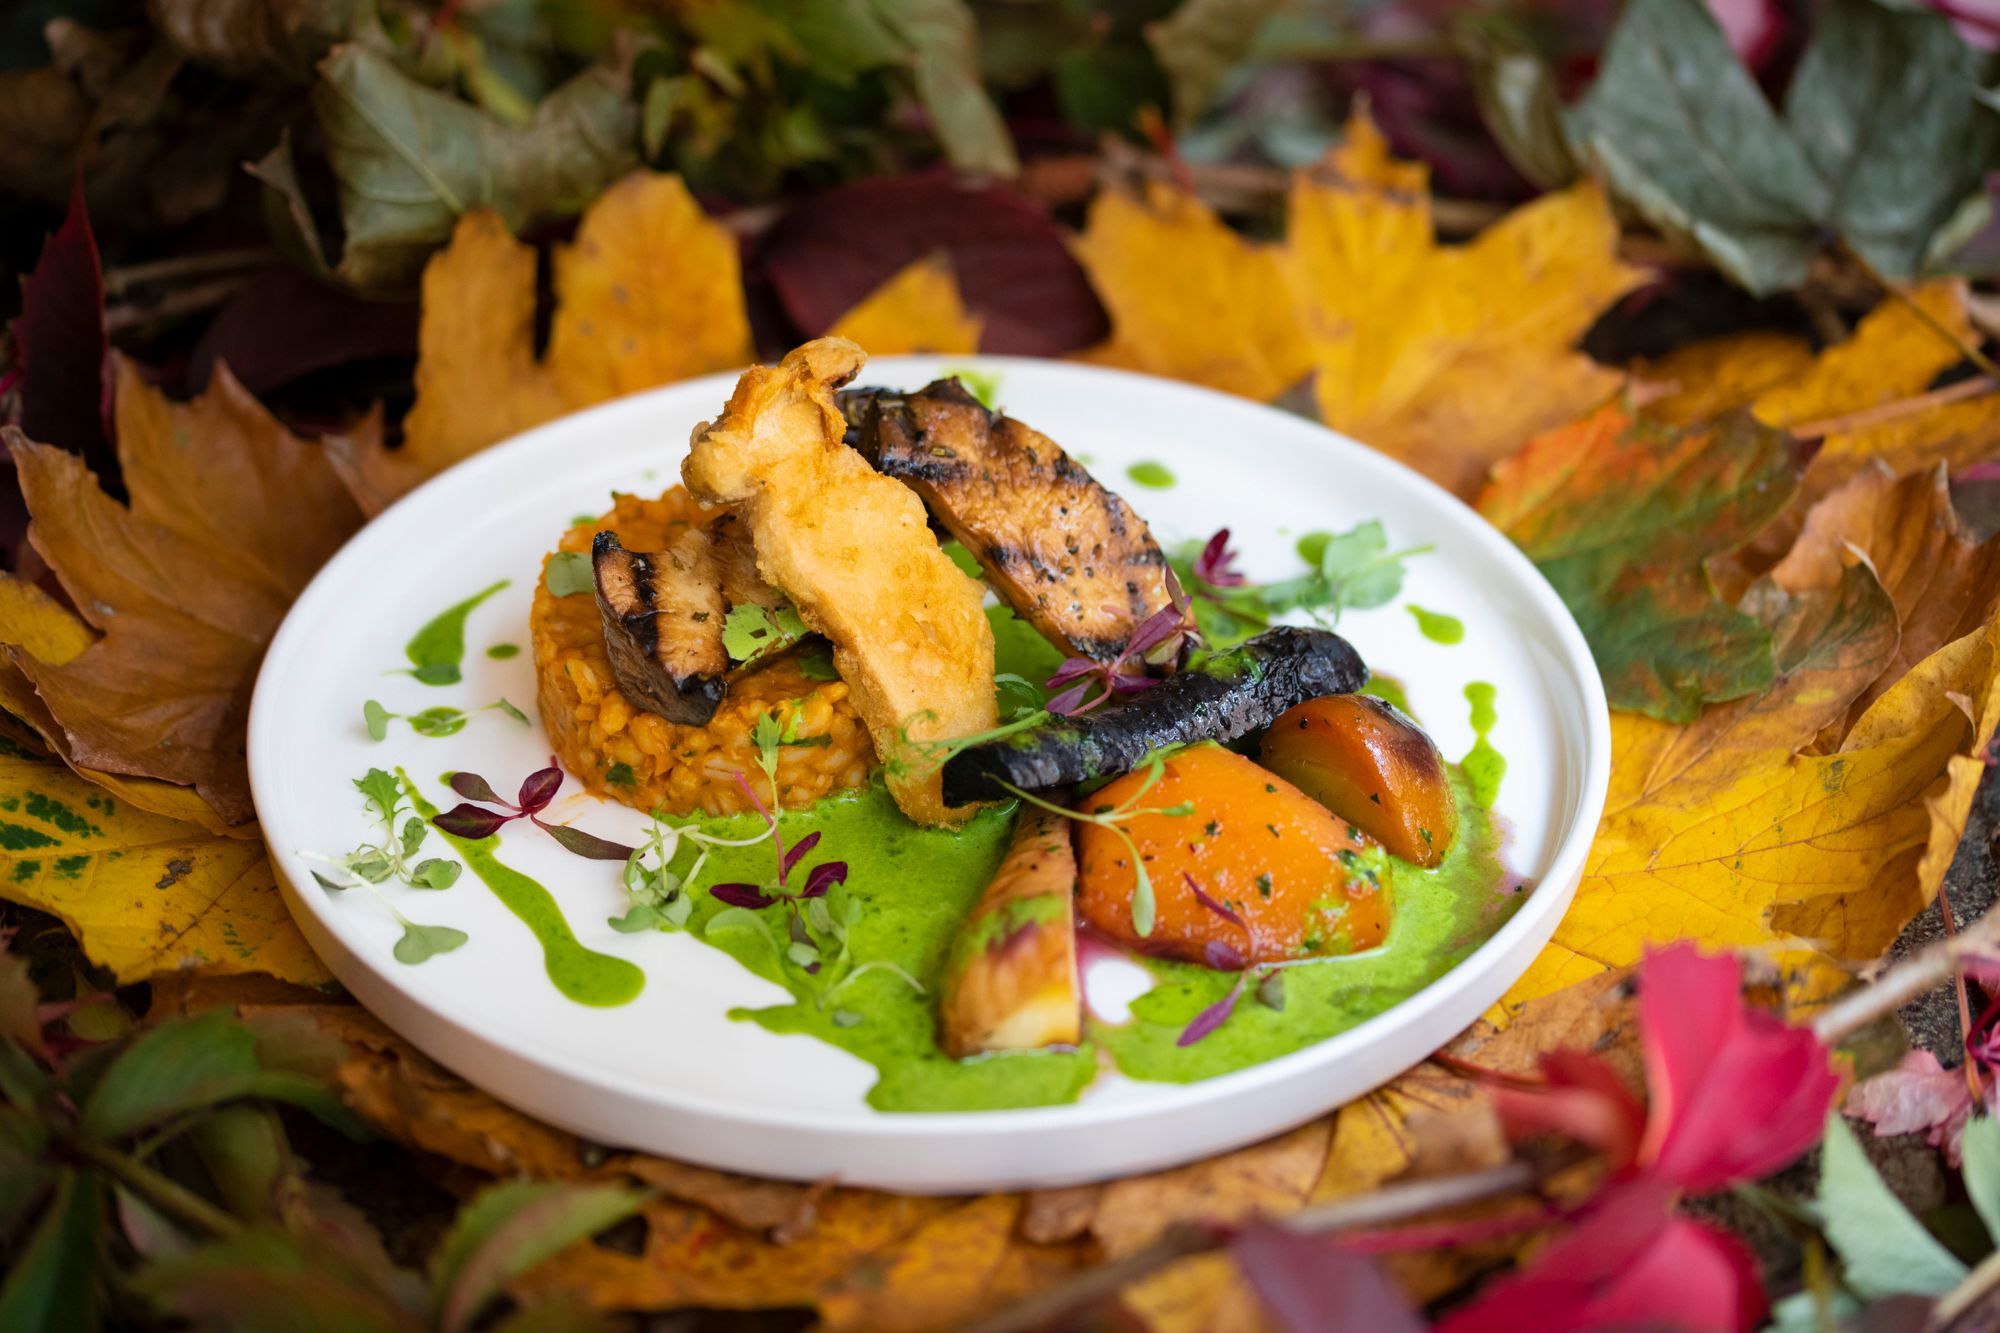 vegetarian dish at Petit Pois brighton. Pictured mushrooms on a white plate, pictured on a bed of autumn leaves